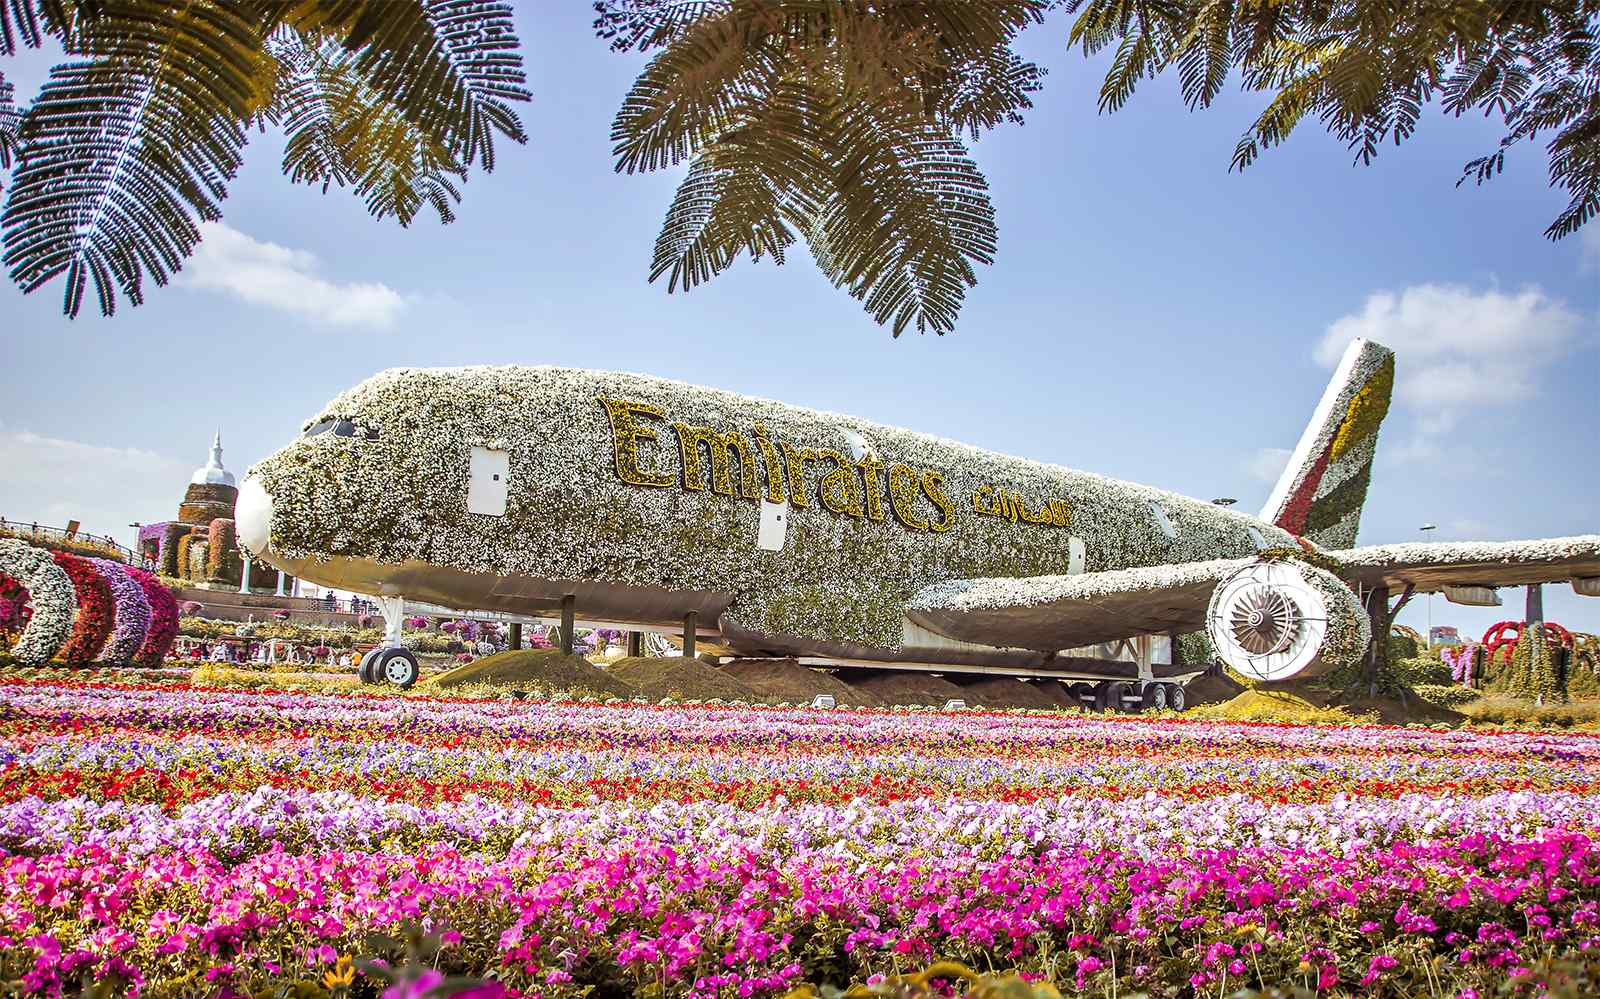 Collaborating with Emirates Airlines, the authority pays tribute to the beloved Airbus A380 by creating the world’s largest floral installation.